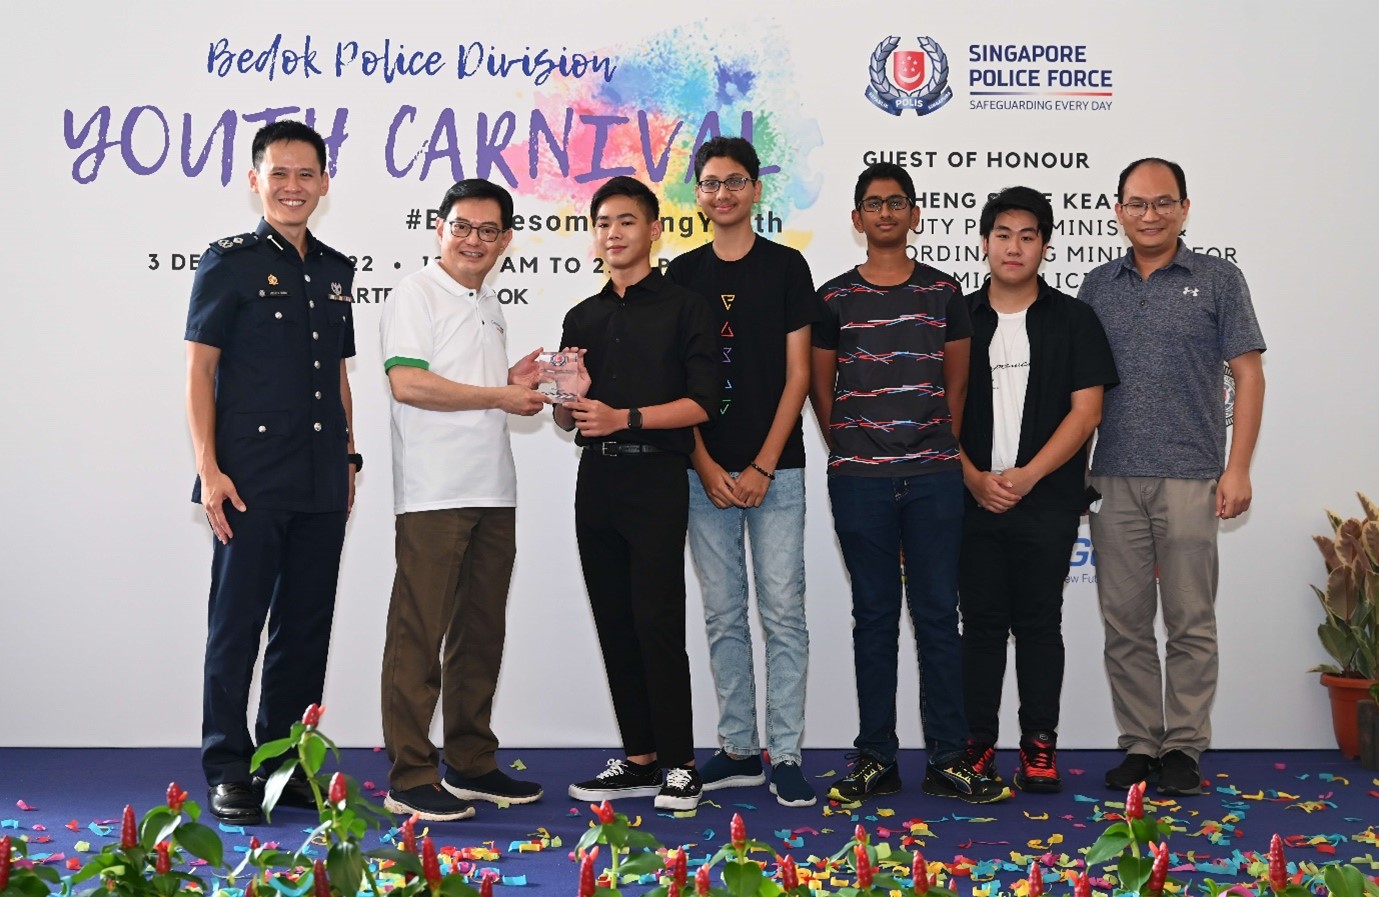 20221208_bedok_police_division_youth_carnival_2022_4